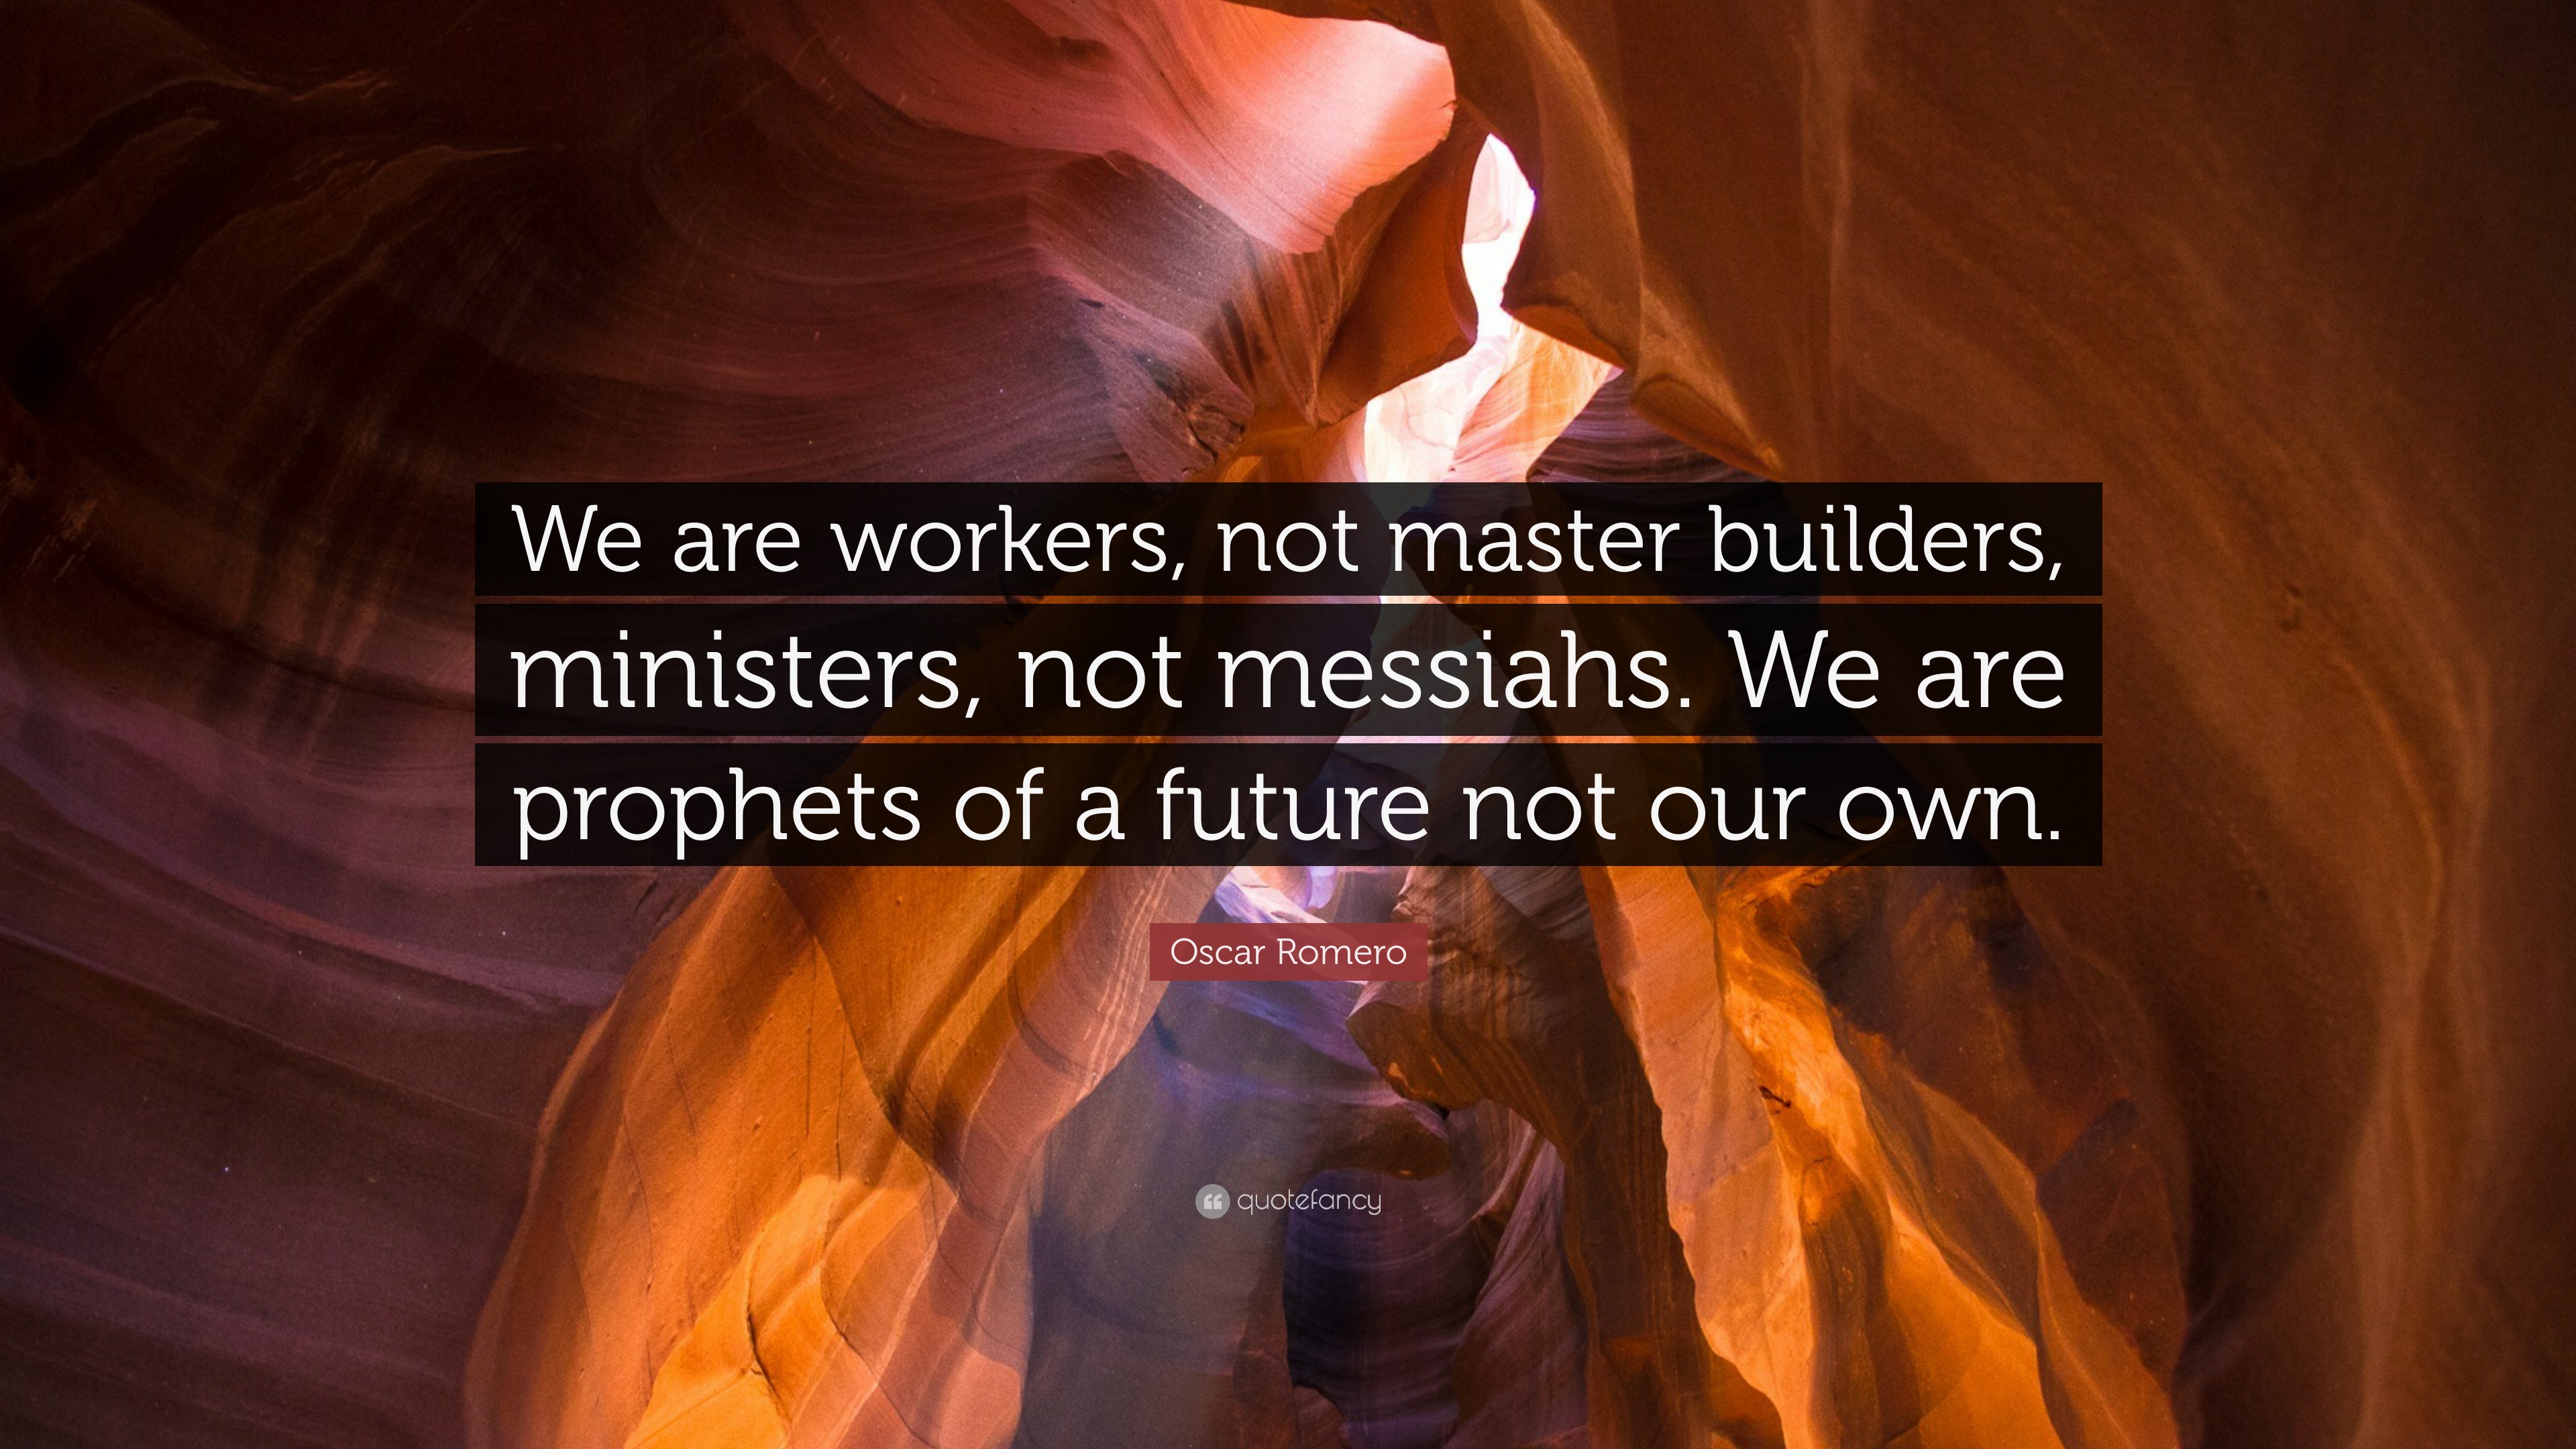 Oscar Romero Quote: “We are workers, not master builders, ministers